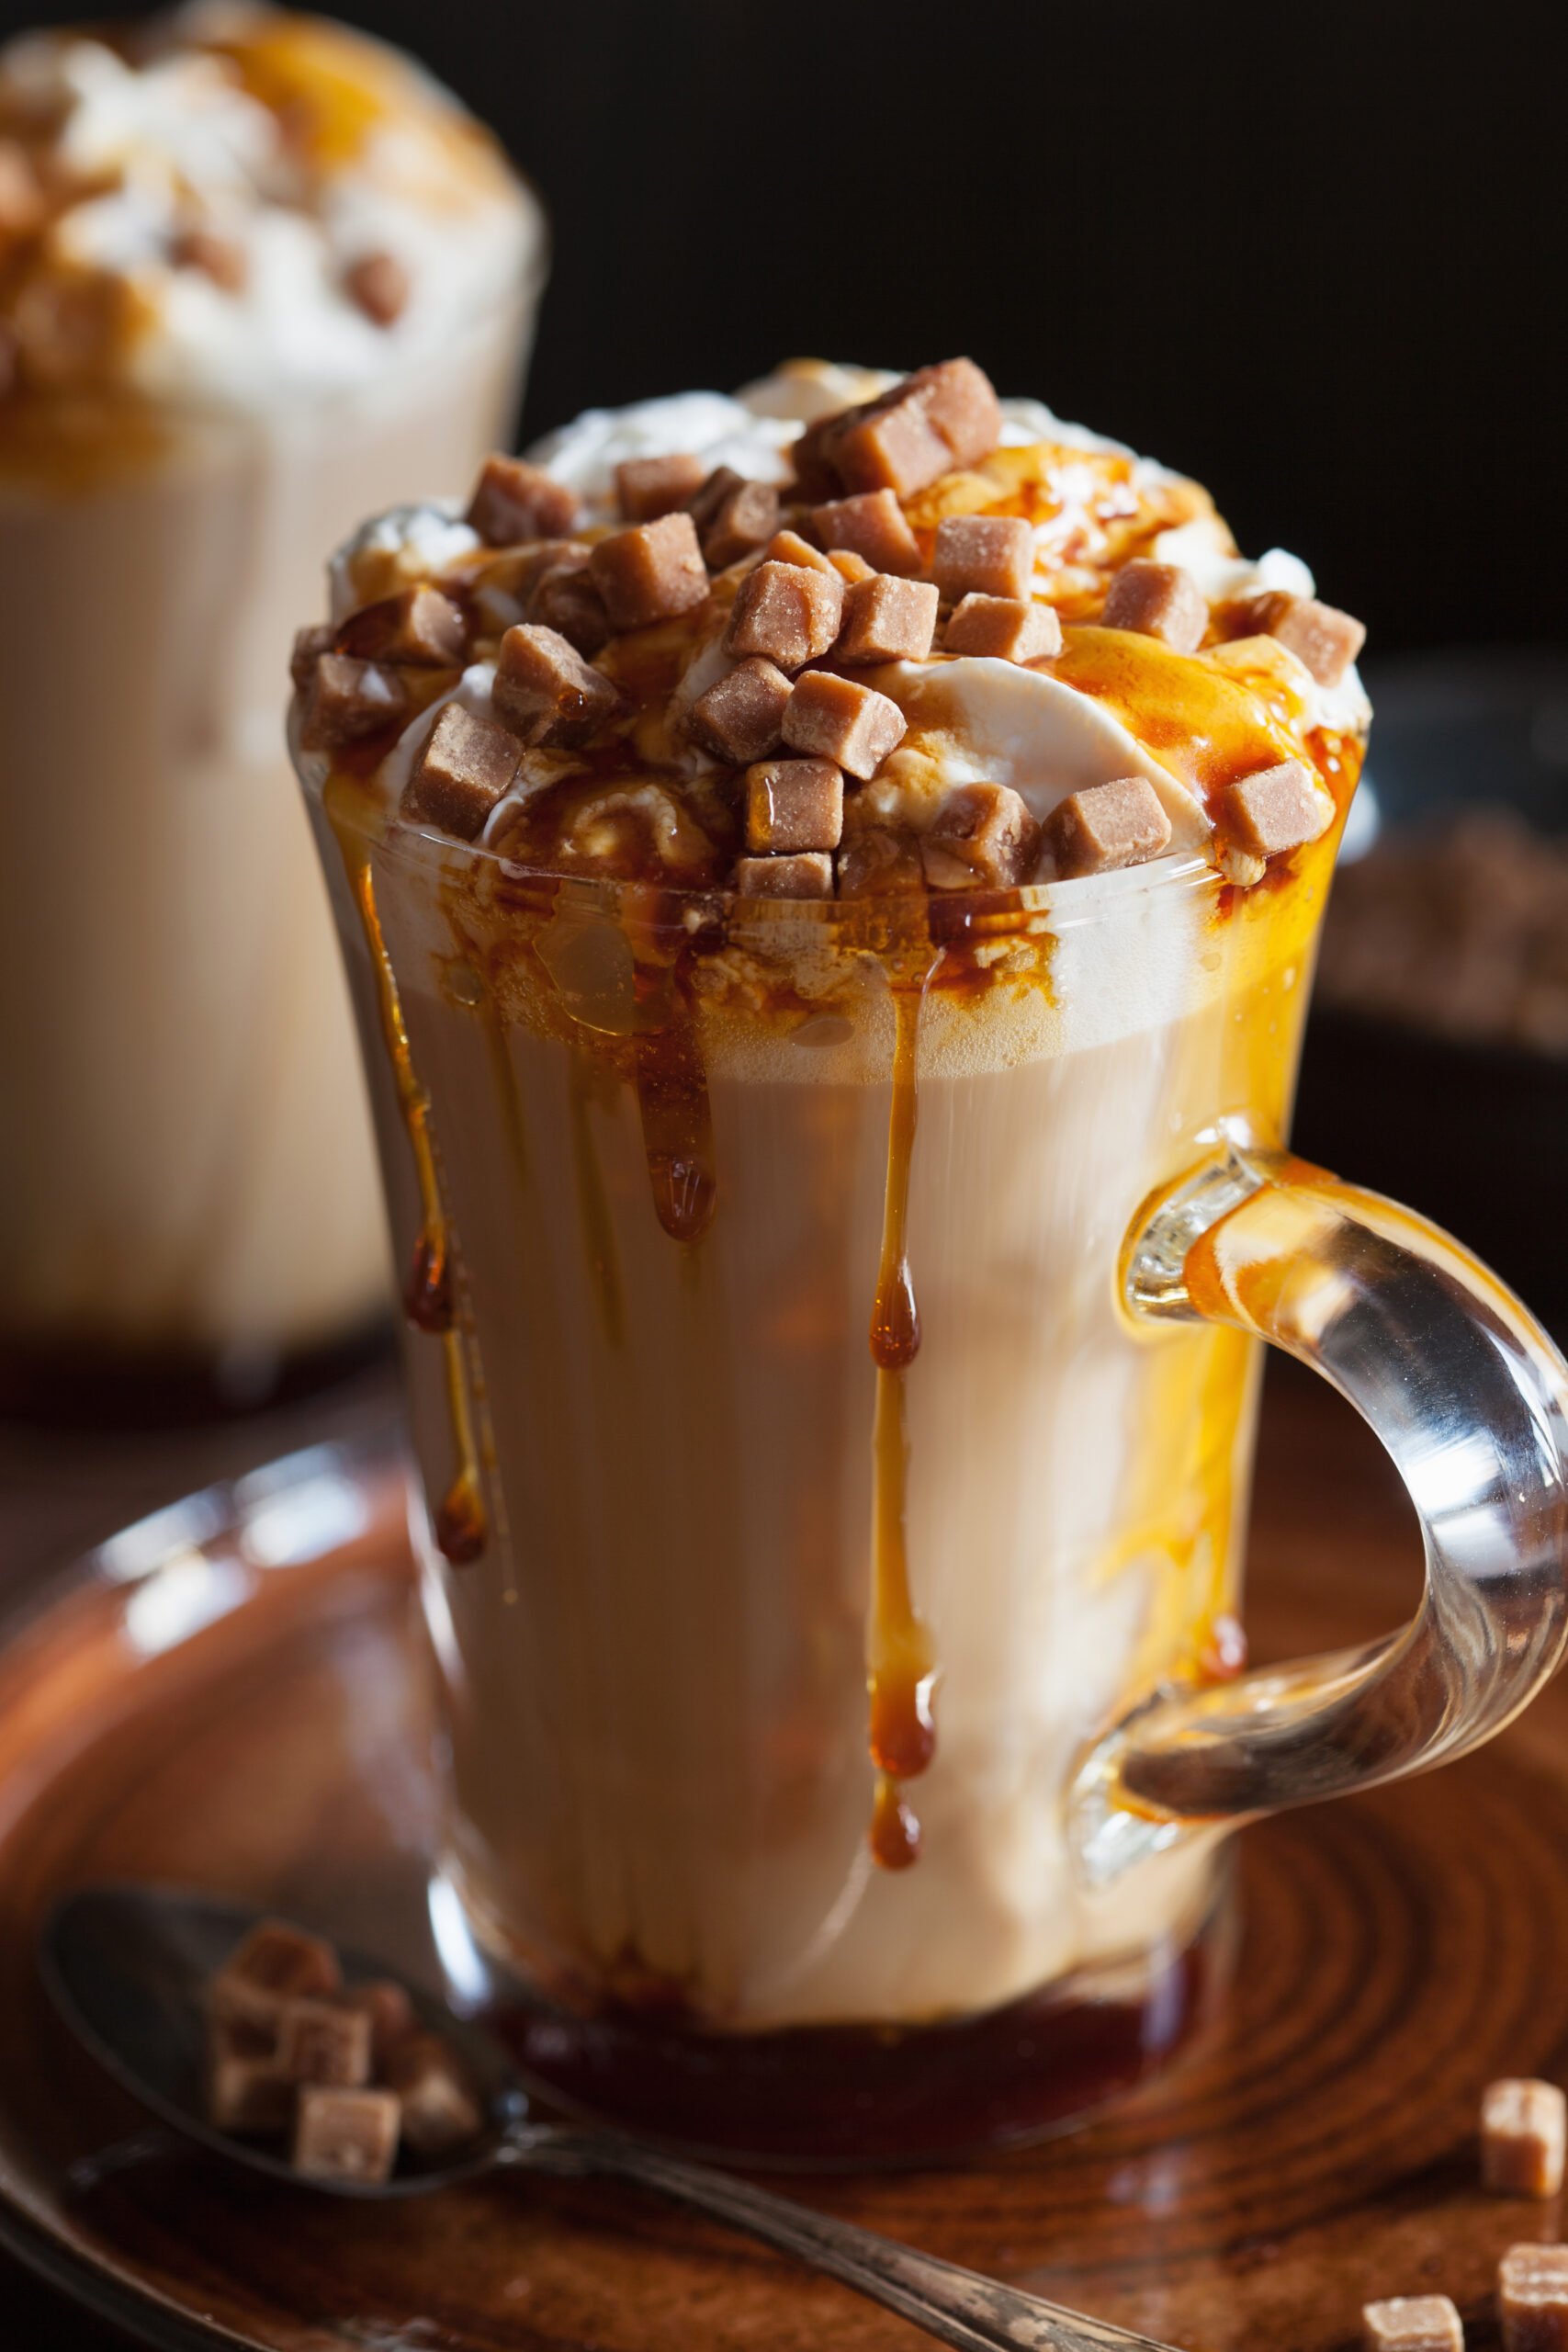 Indulge in a guilt-free Caramel Nonfat Latte with this easy-to-follow recipe. Made with sugar-free caramel syrup and nonfat milk, this delicious healthier latte is perfect for satisfying your sweet tooth. 